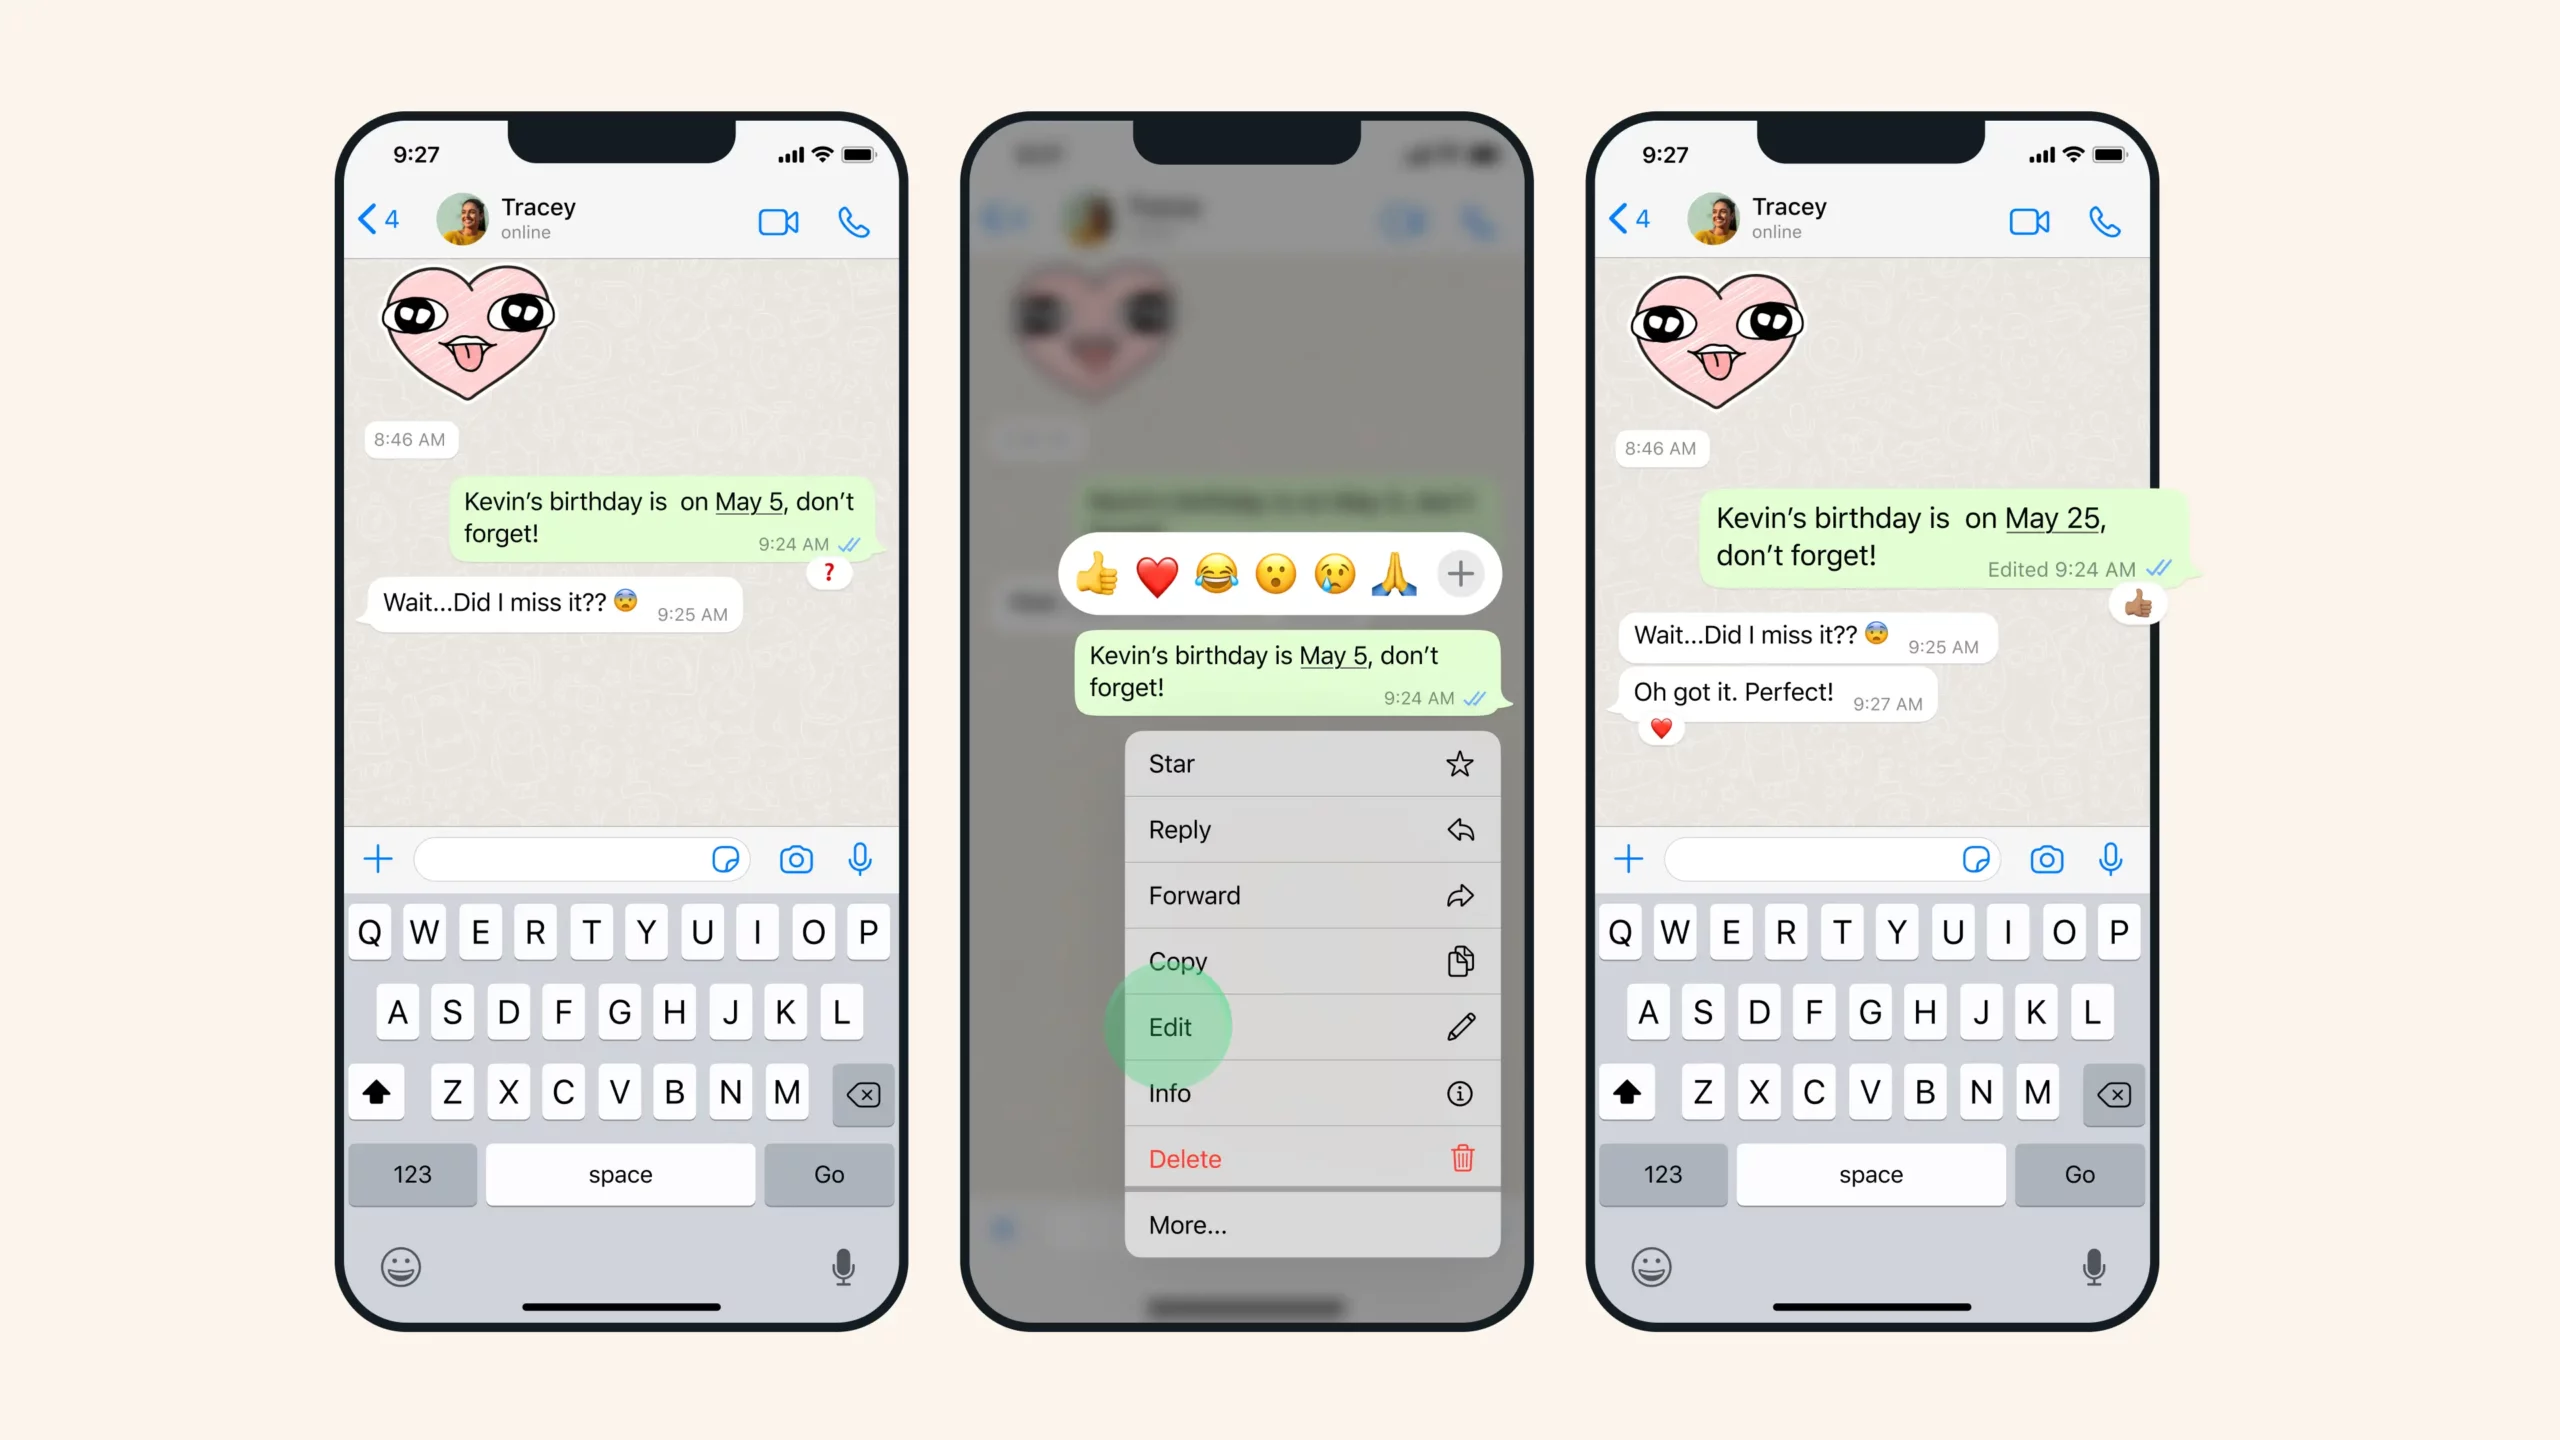 WhatsApp allows editing of sent messages